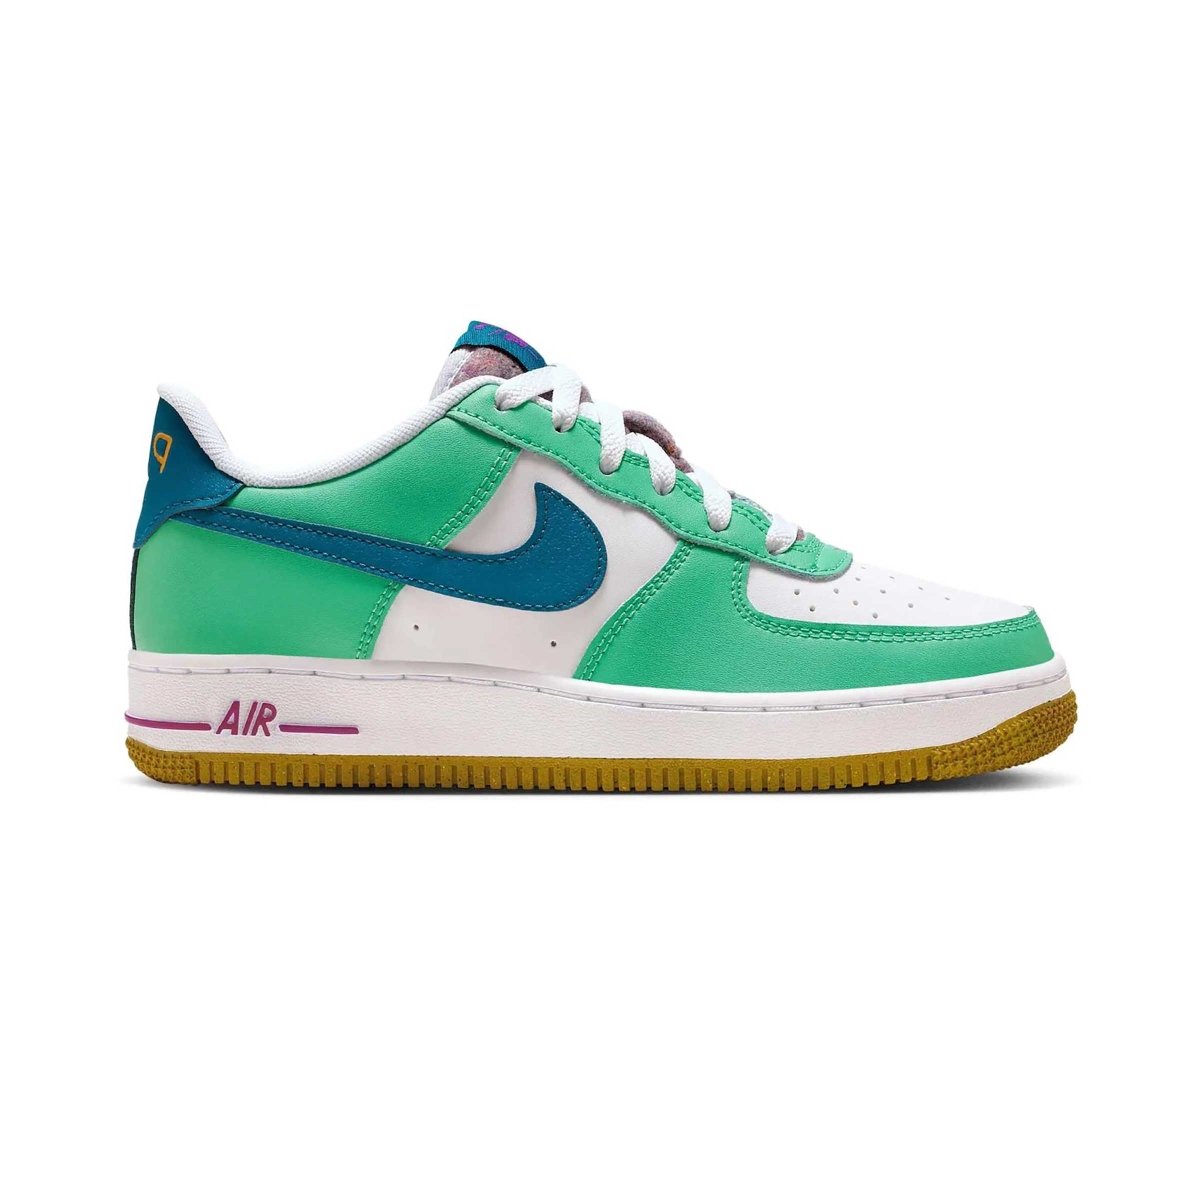 Nike GS (Grade School) Air Force 1 LV8 Play - 10030426 - West NYC